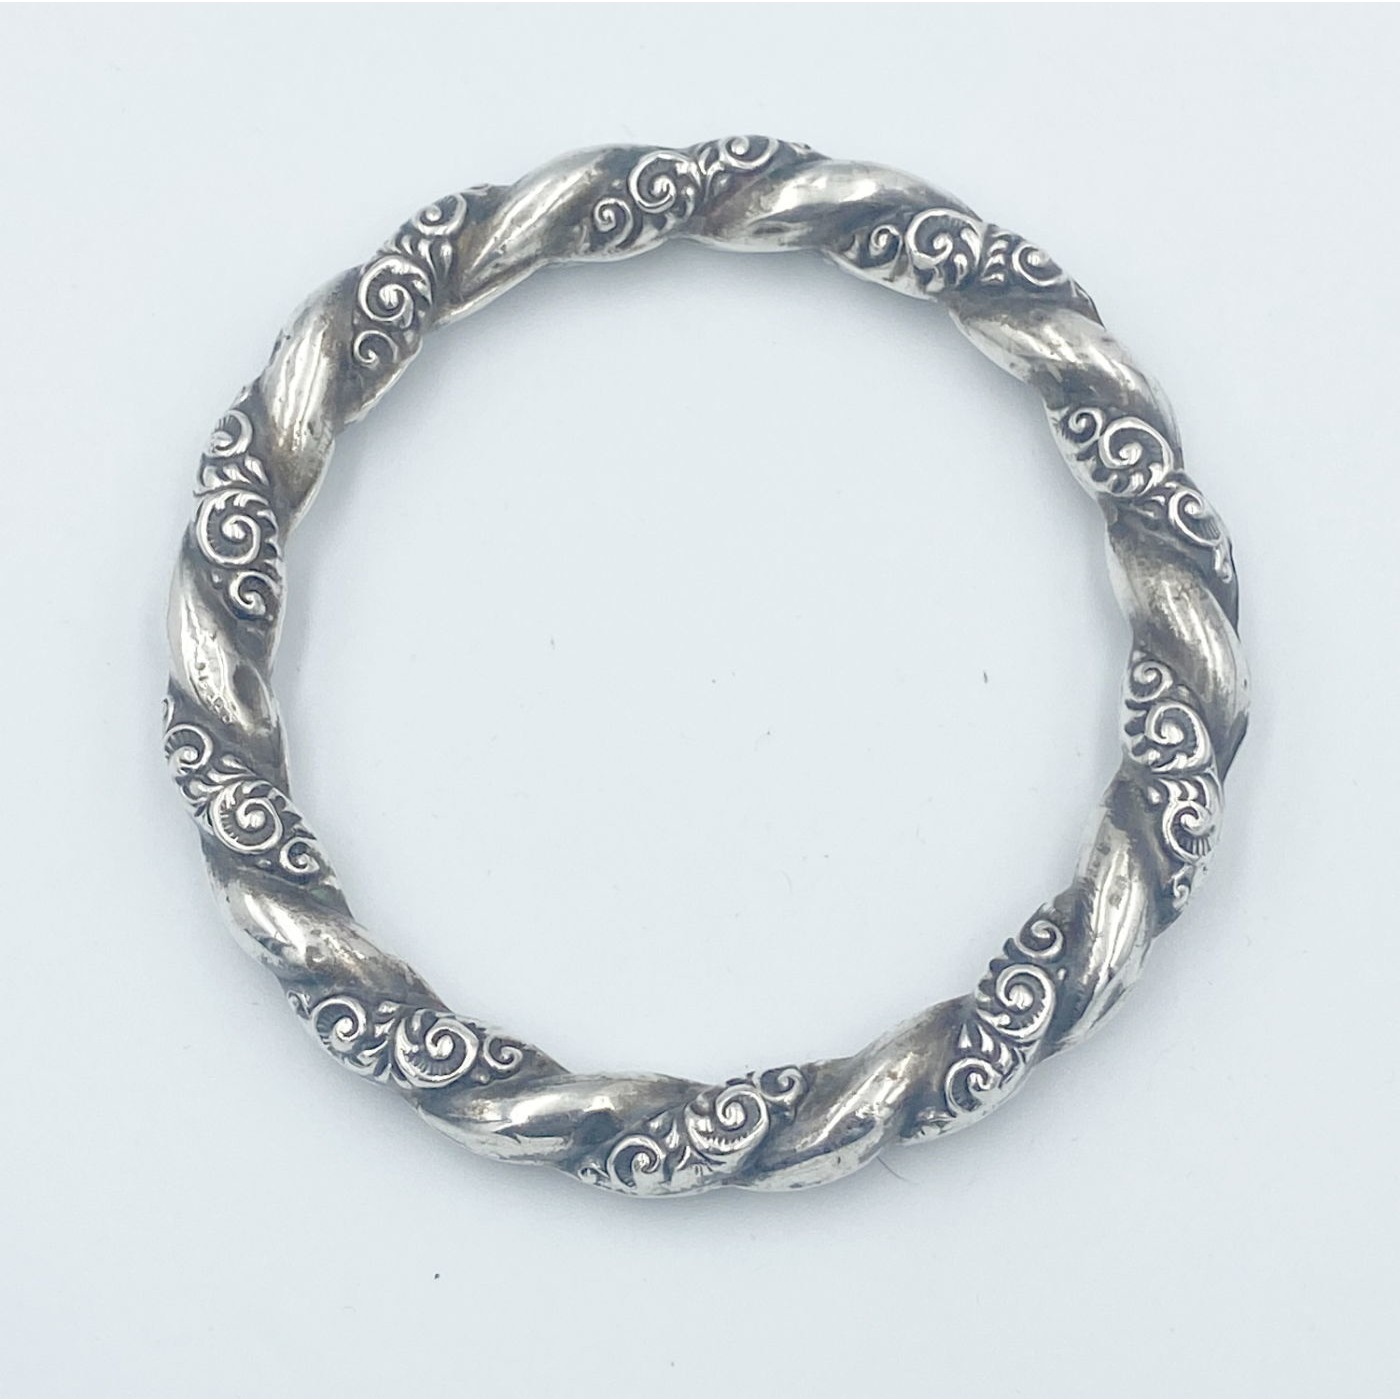 Beautiful Engraved Repousse Sterling Silver English Teething Bangle - 2